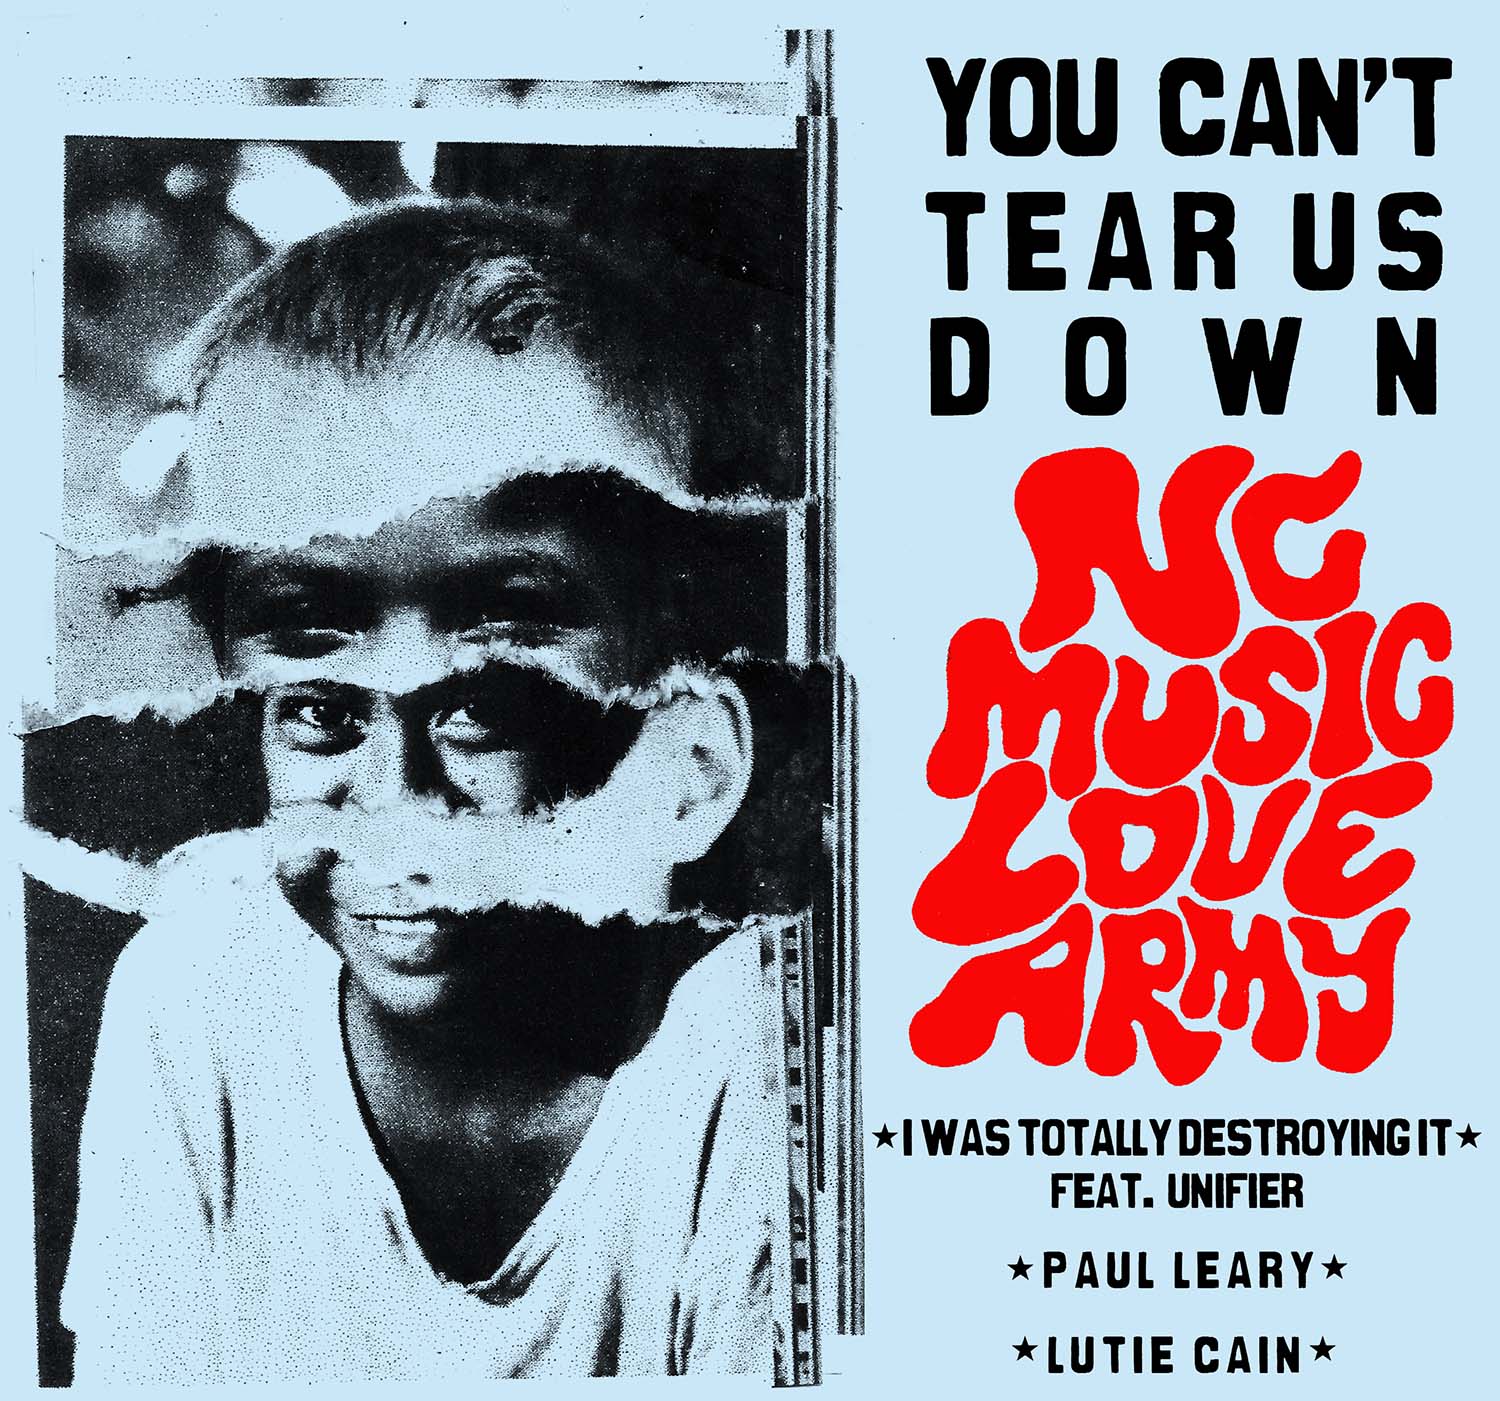 NC Music Love Army "You Can't Tear Us Down"